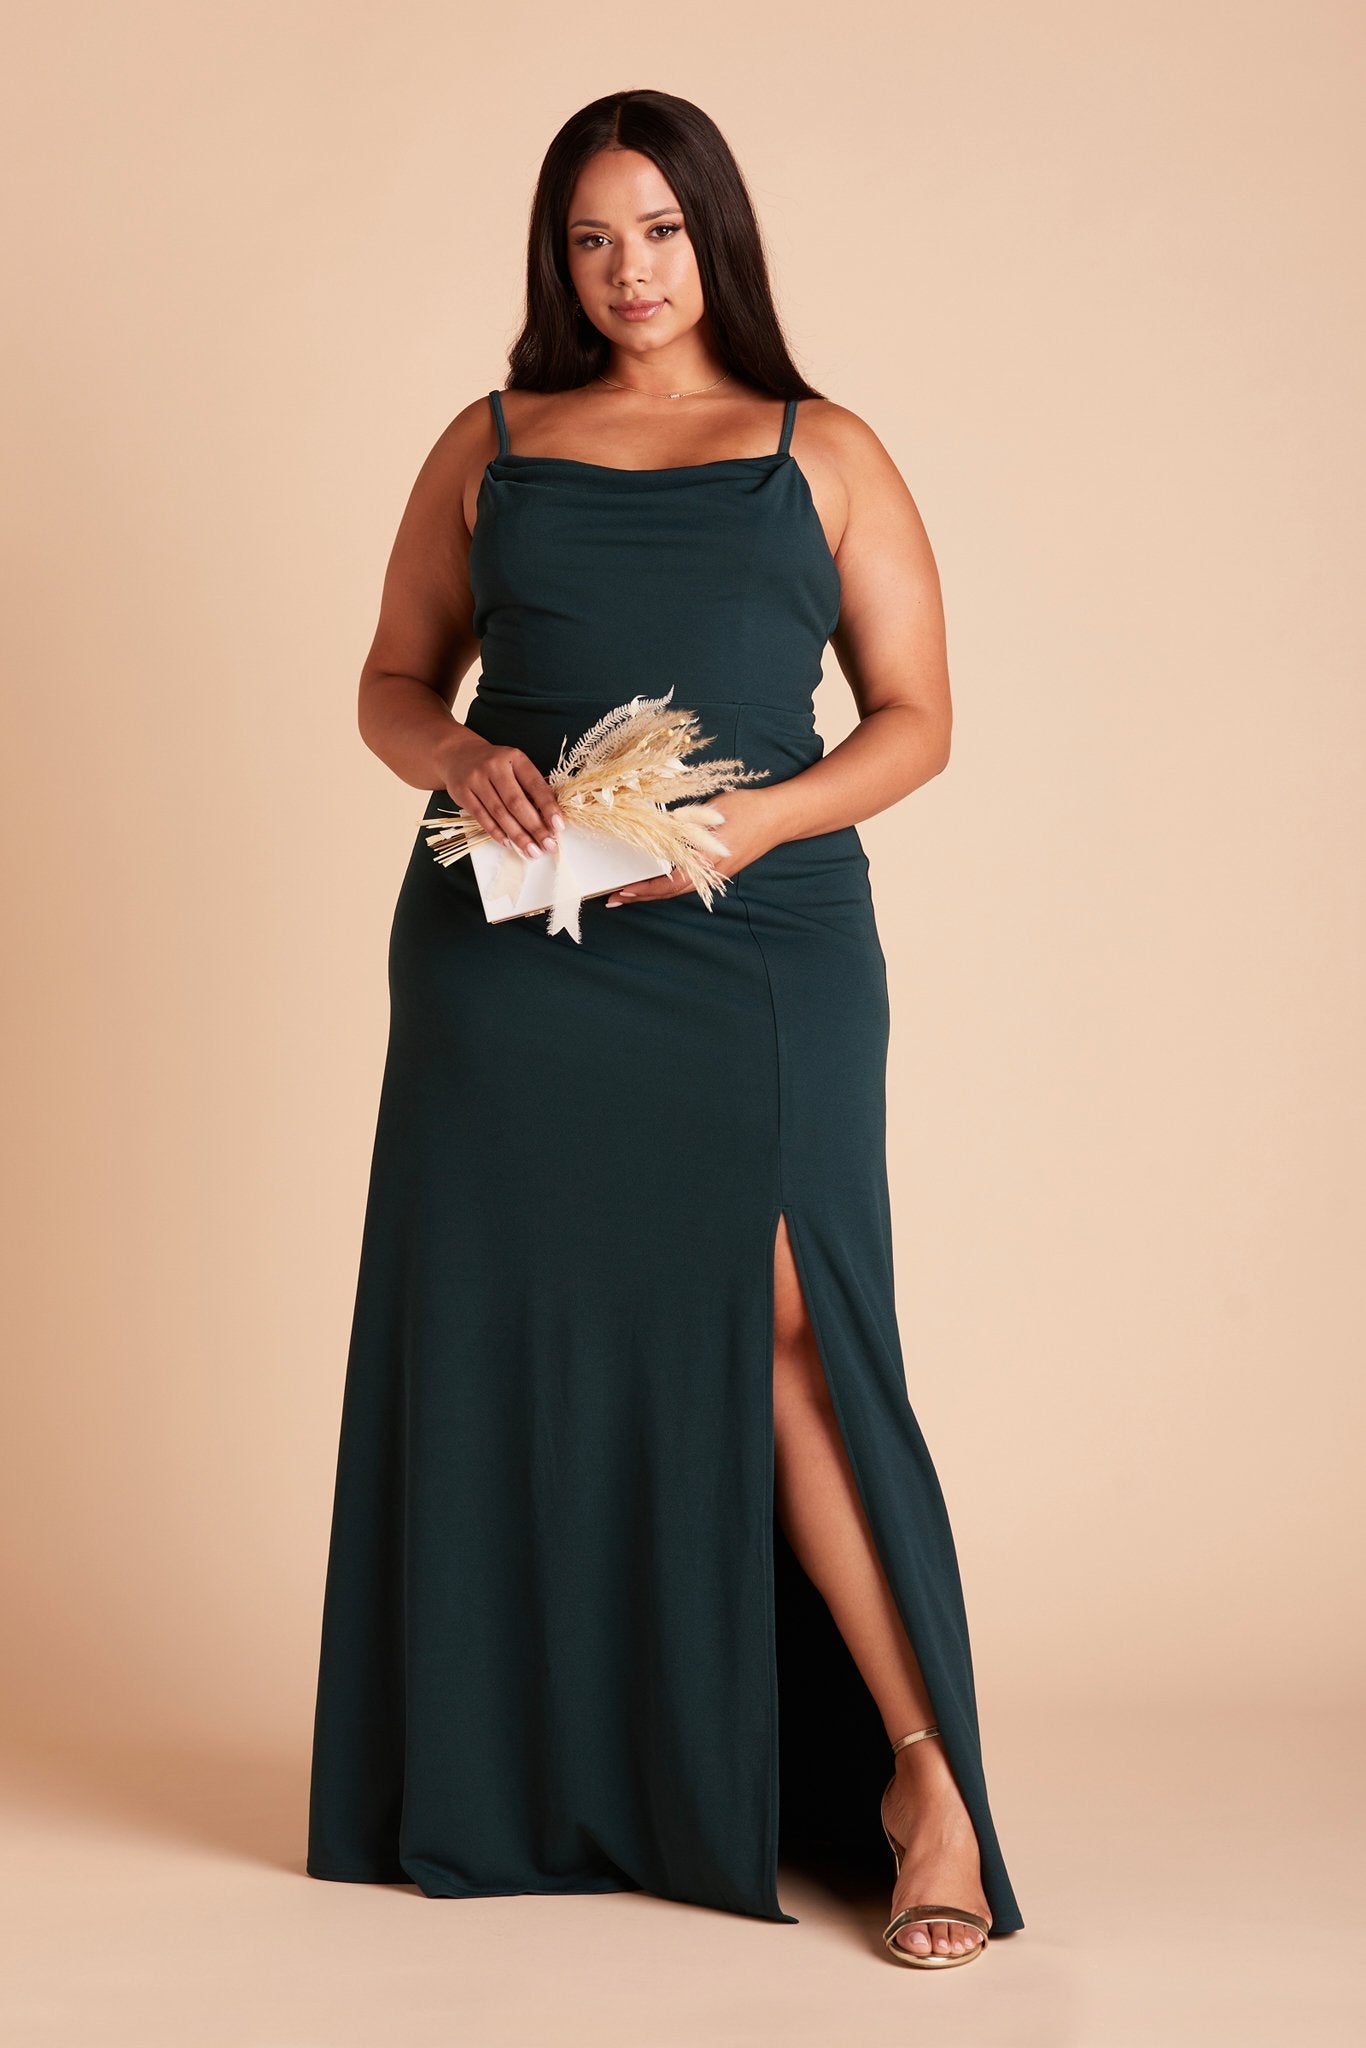 Front view of the floor-length Ash Plus Size Bridesmaid Dress in emerald crepe by Birdy Grey with a slightly draped cowl neck front. The flowing skirt features a slit over the front left leg.